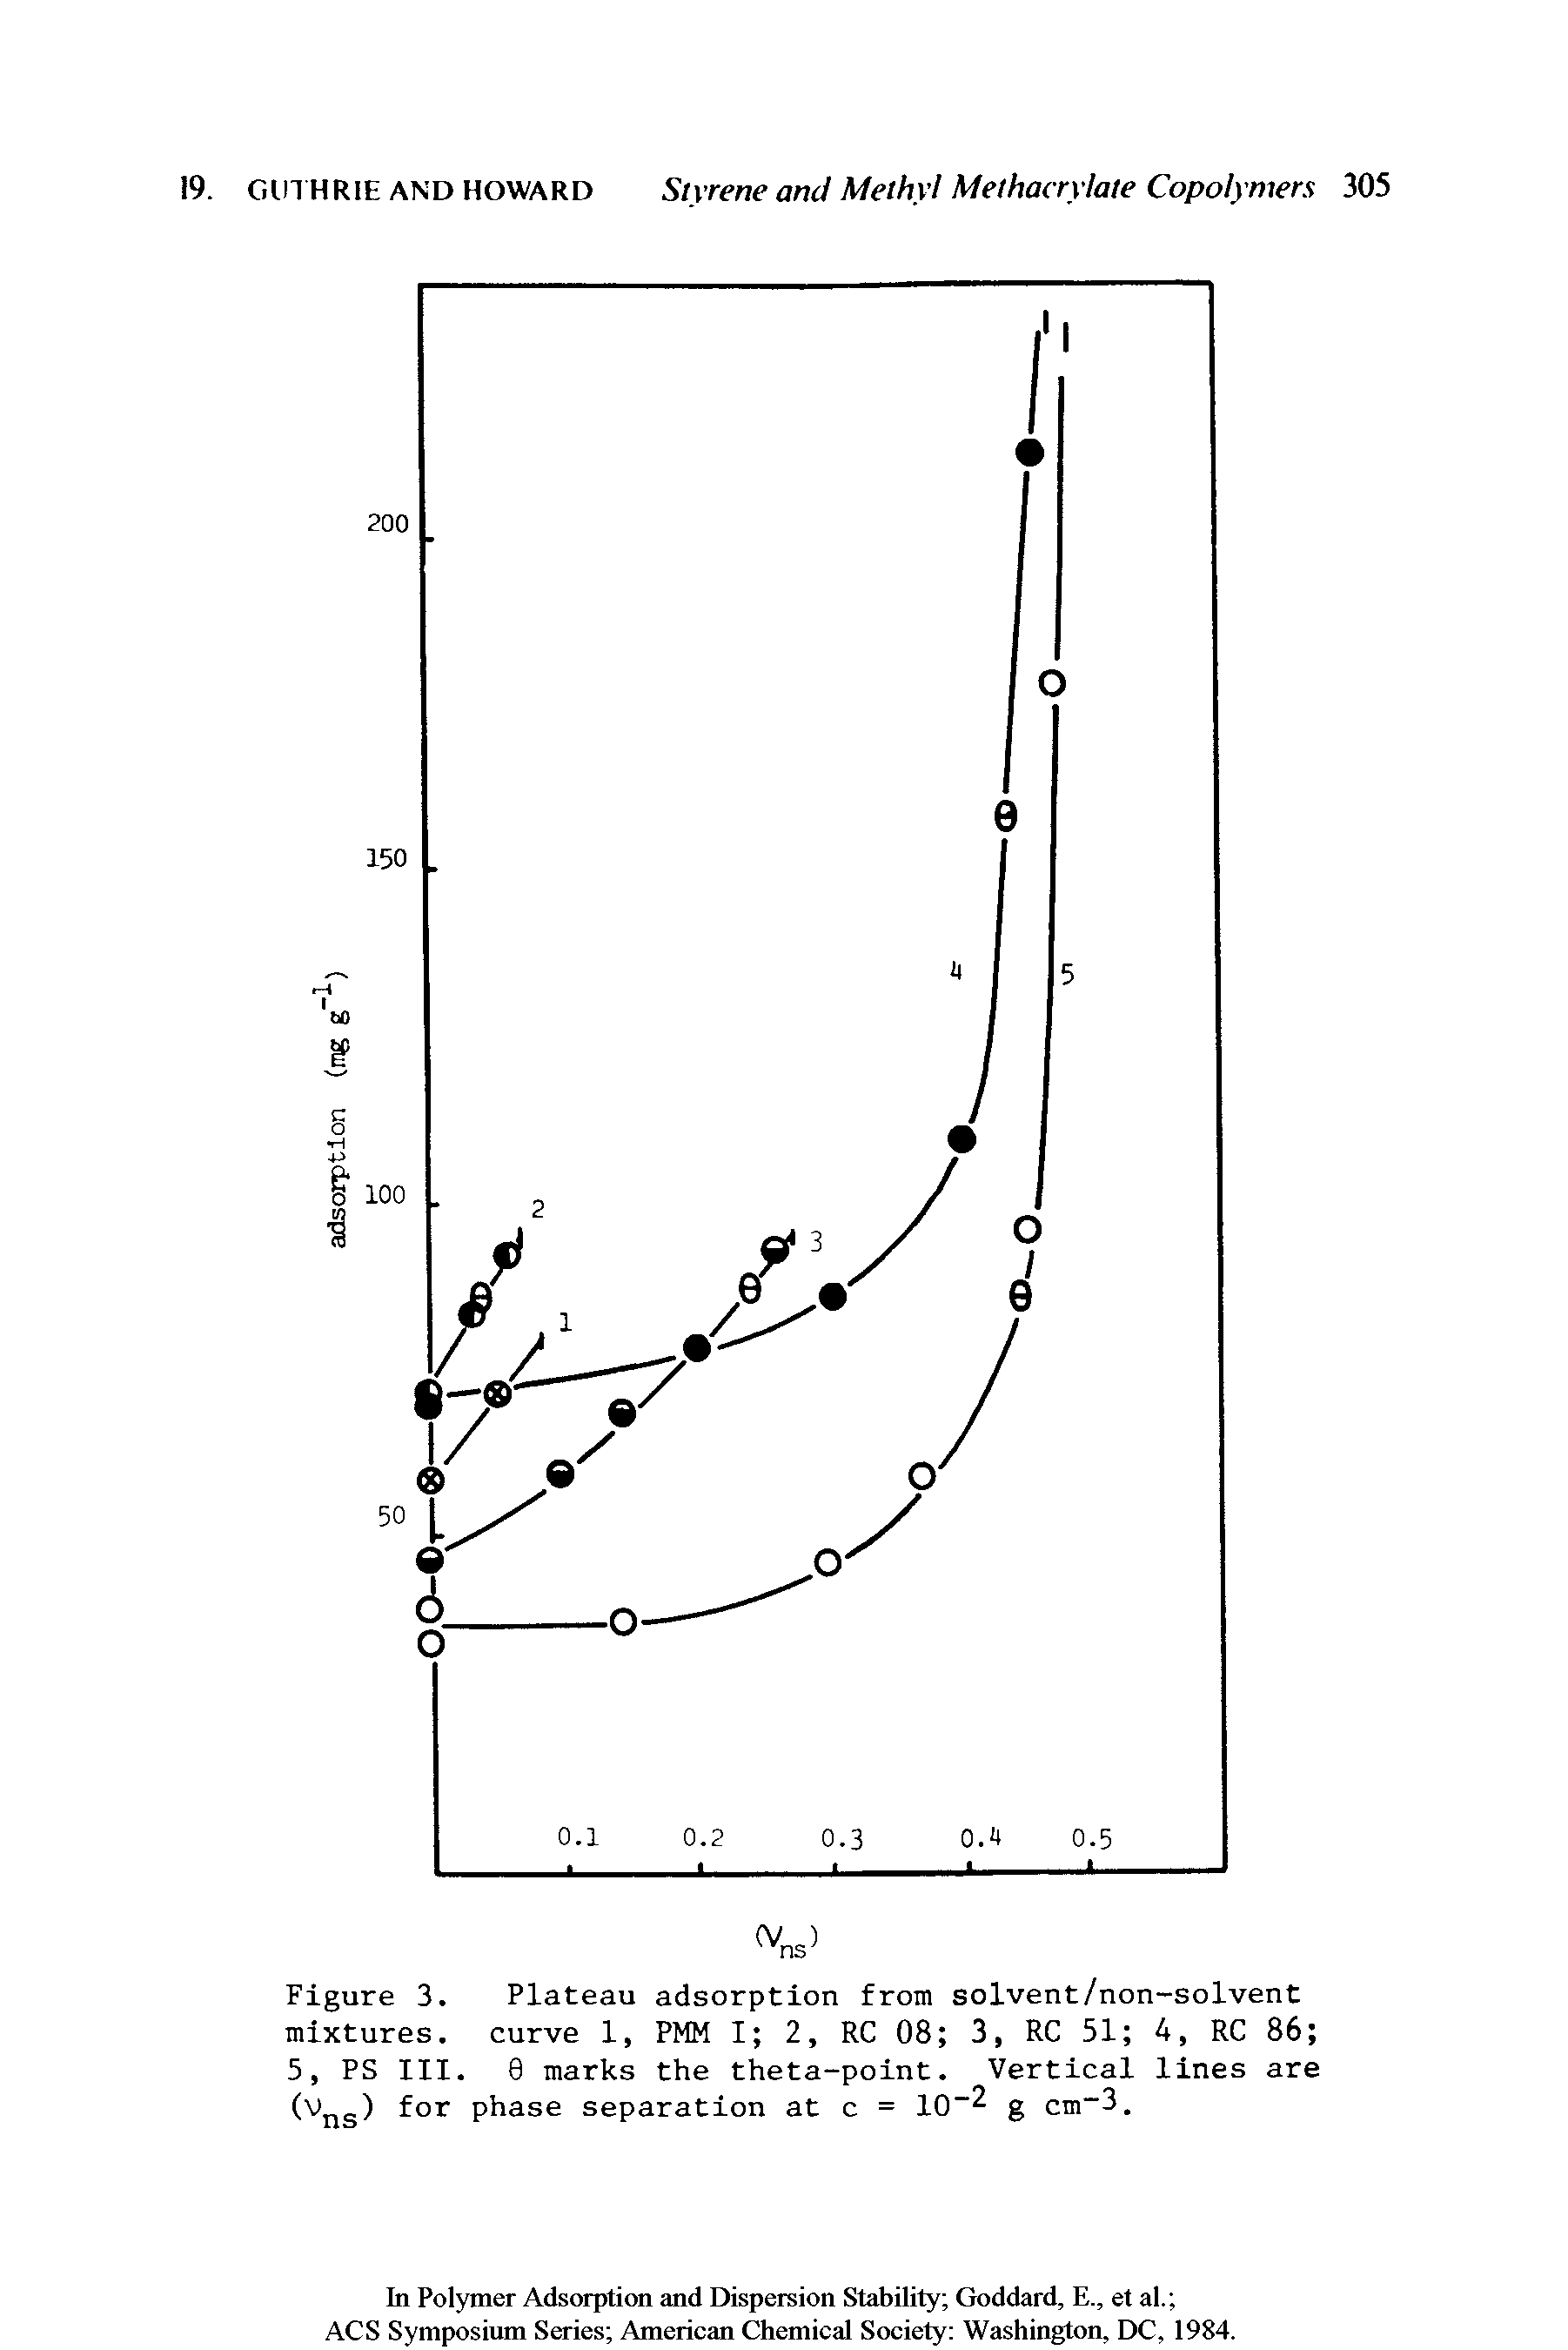 Figure 3. Plateau adsorption from solvent/non-solvent mixtures, curve 1, PMM I 2, RC 08 3, RC 51 A, RC 86 5, PS III. 8 marks the theta-point. Vertical lines are (Vns) for phase separation at c = 10 2 g cm-3.